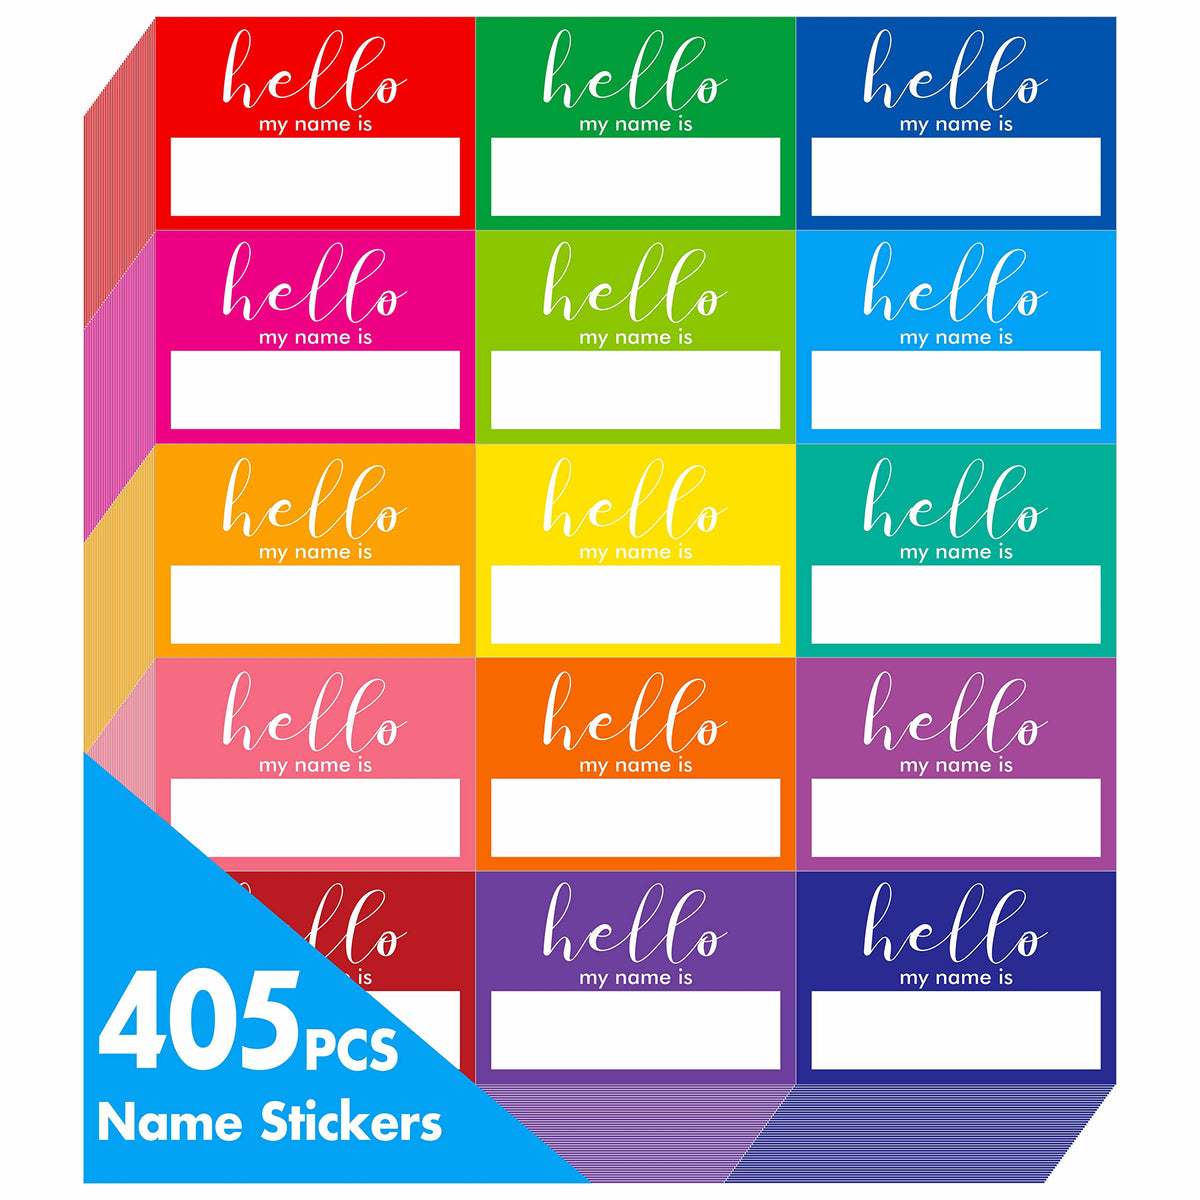 Hebayy 405 PCS Cursive Name Tag Rainbow Stickers, White Script Fonts, 15 Colors for Themed Party School Office Home (3''x2'' Each)